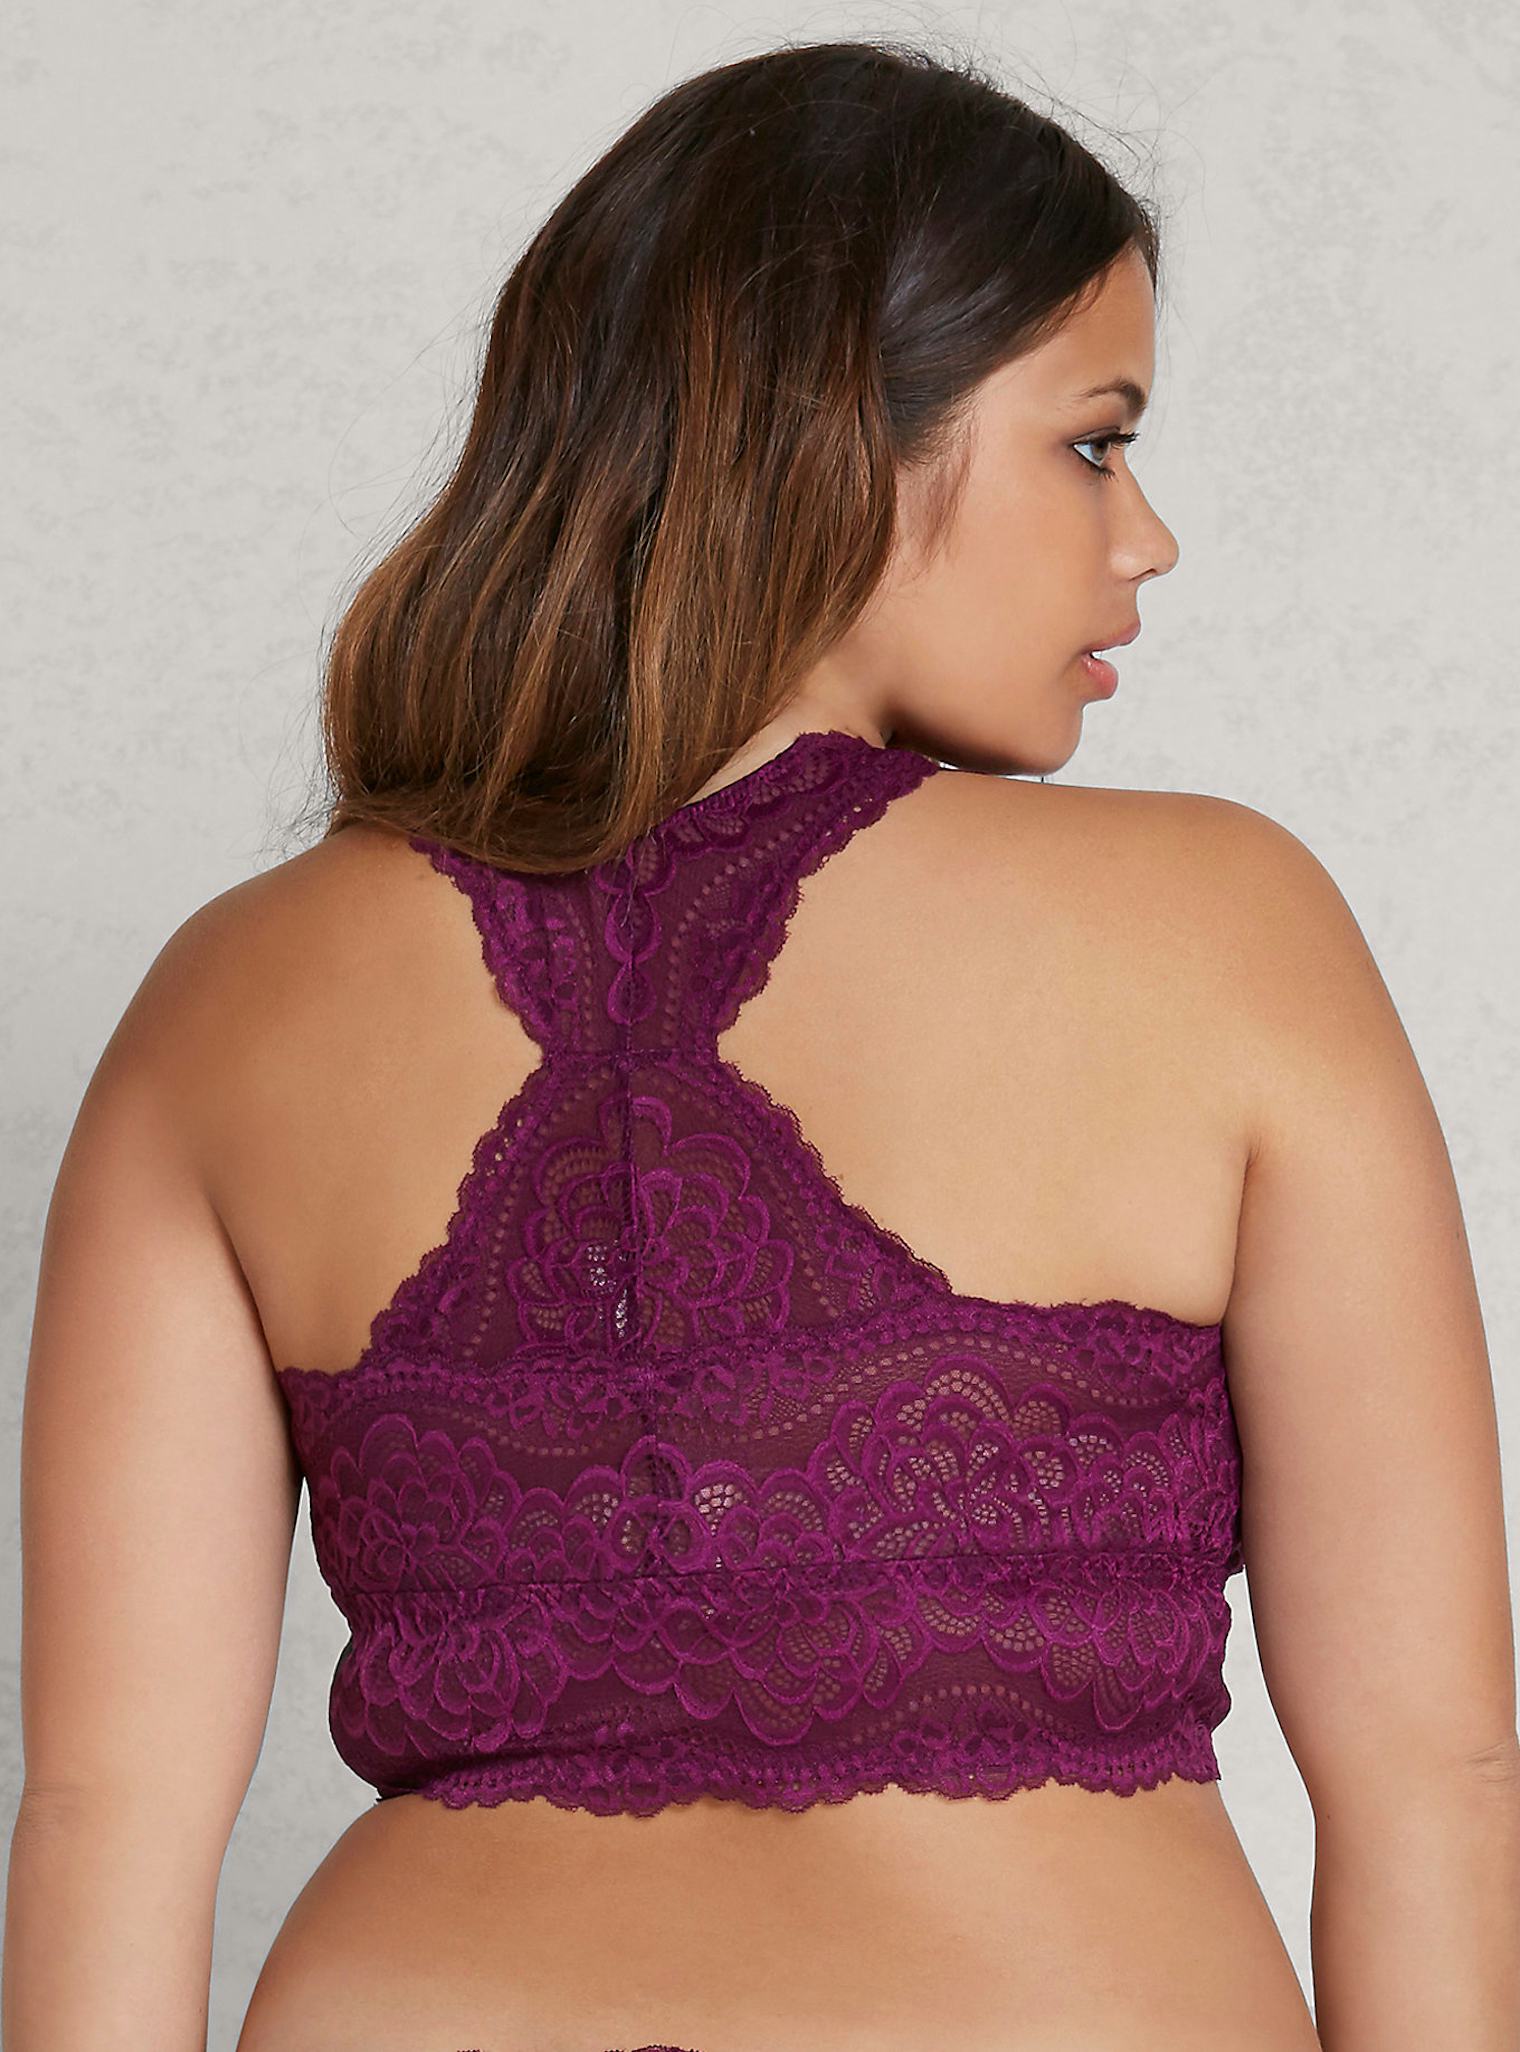 13 Colorful Plus Size Bralettes For Haters Of All Things Underwire — Photos